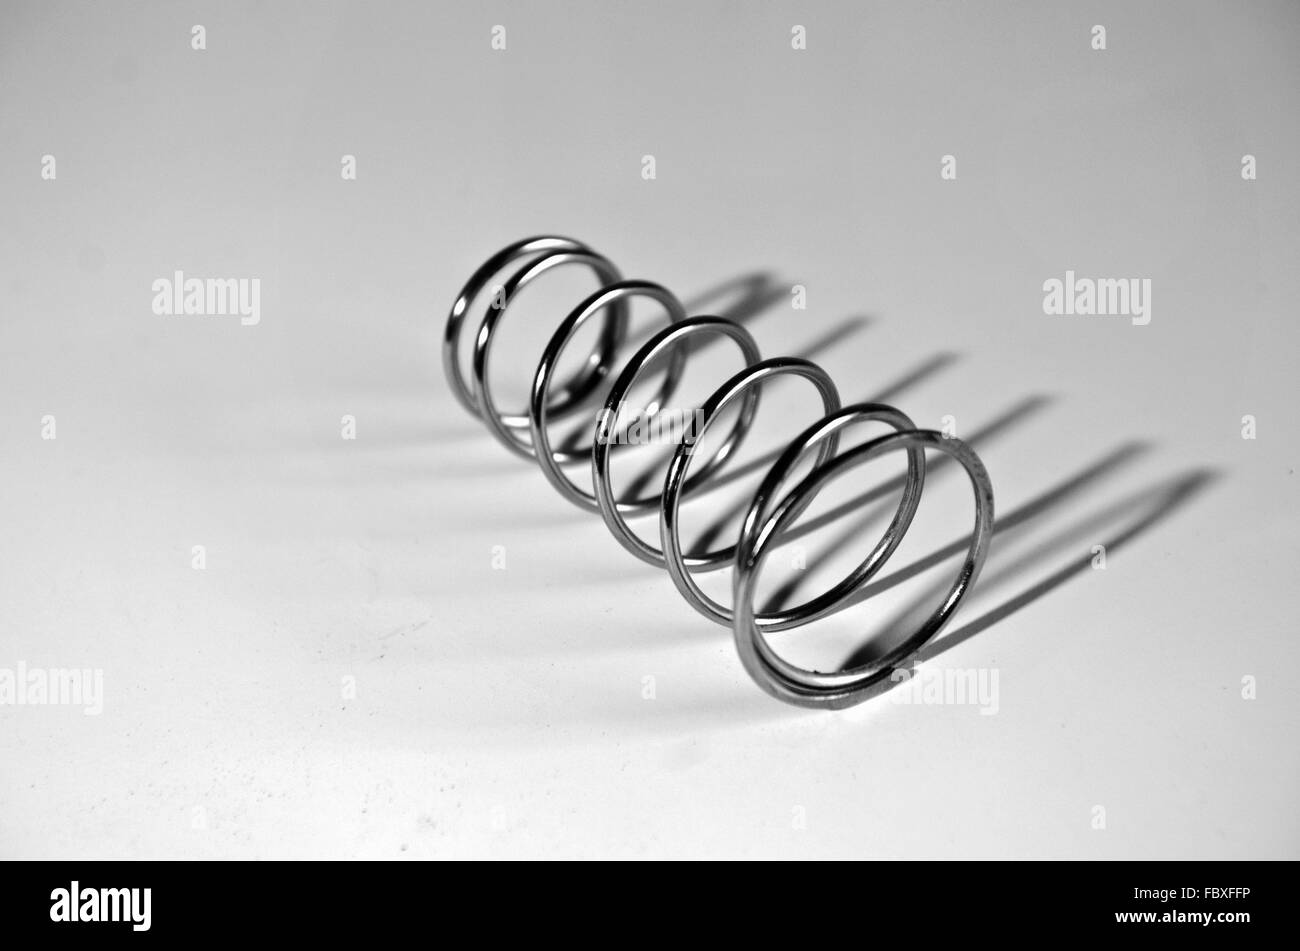 shock absorber Stock Photo